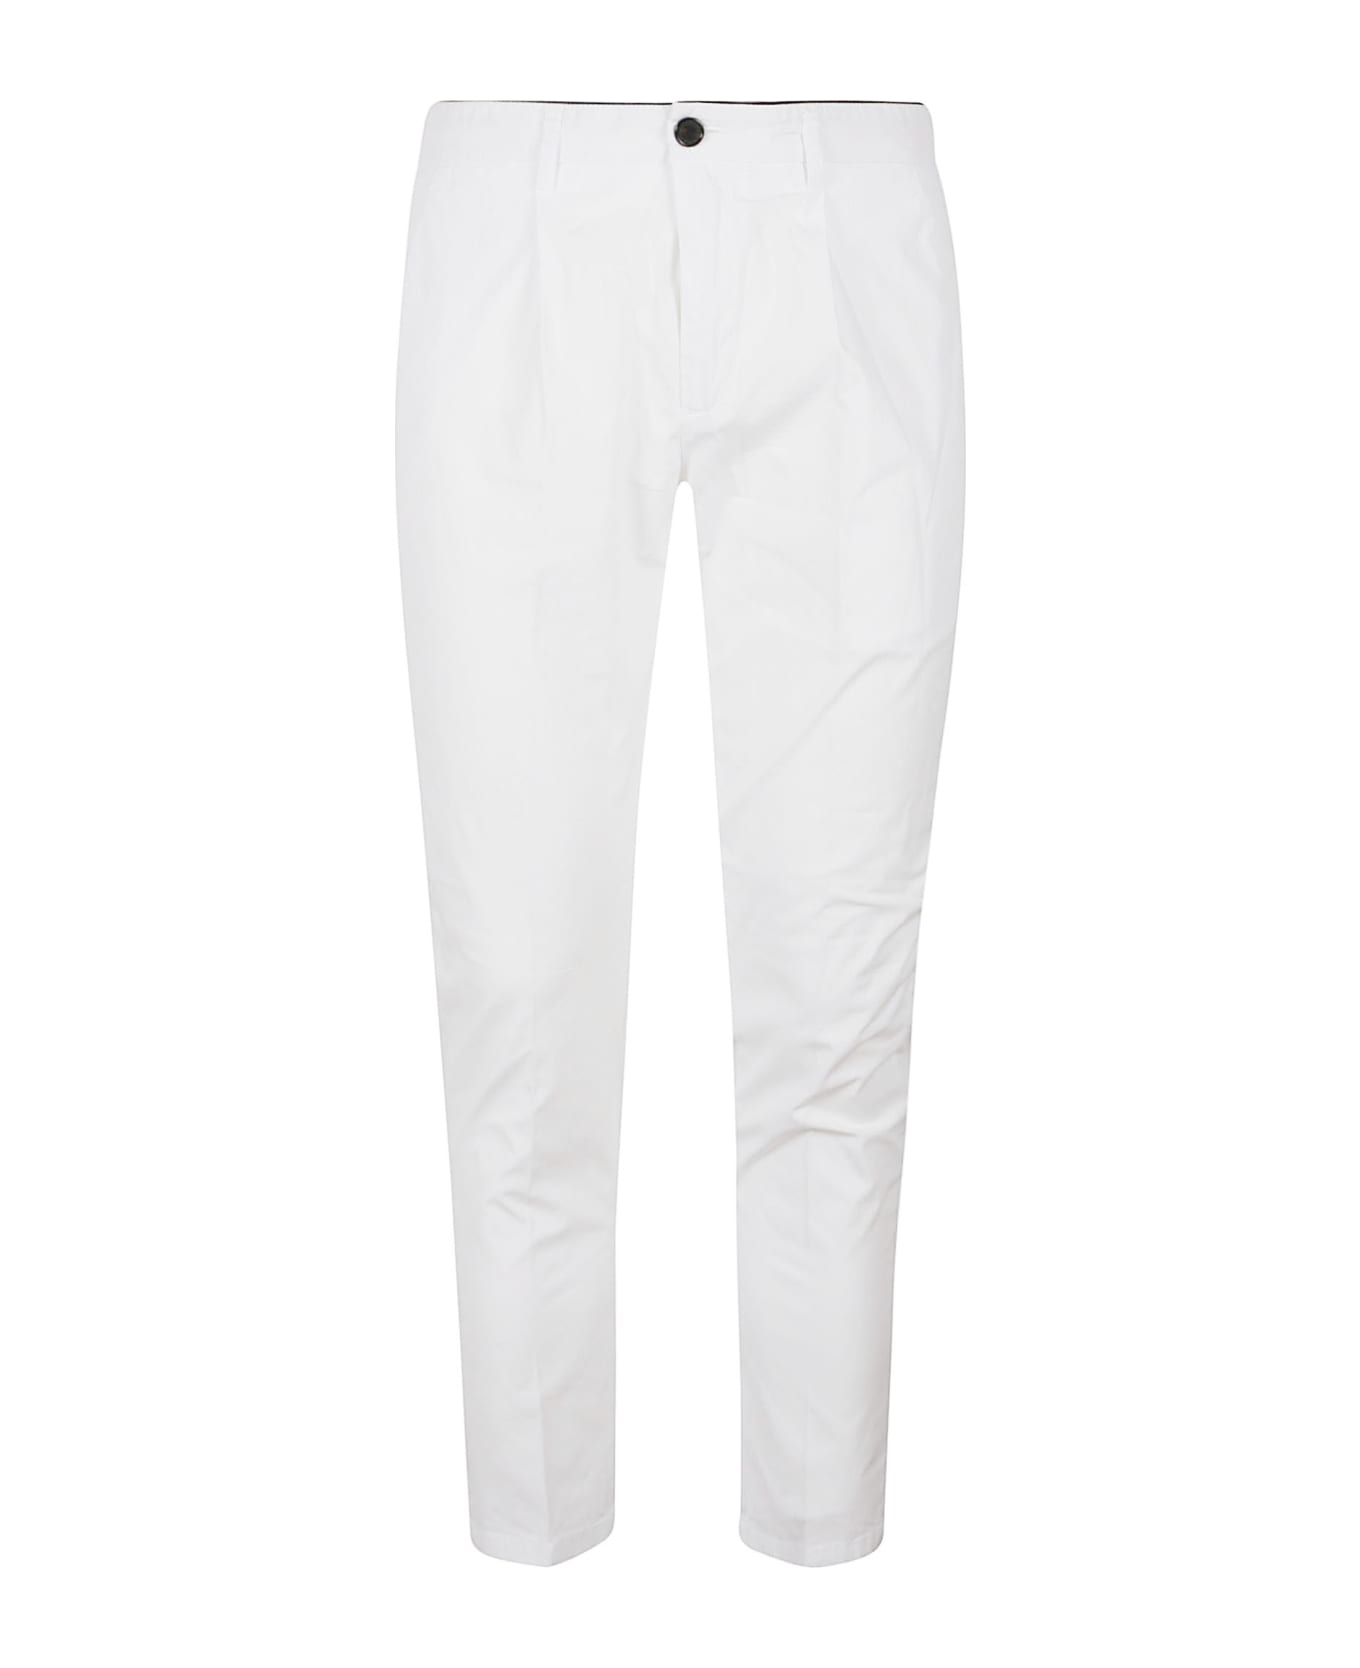 Department Five Prince Pences Chinos Pant - Bianco Ottico